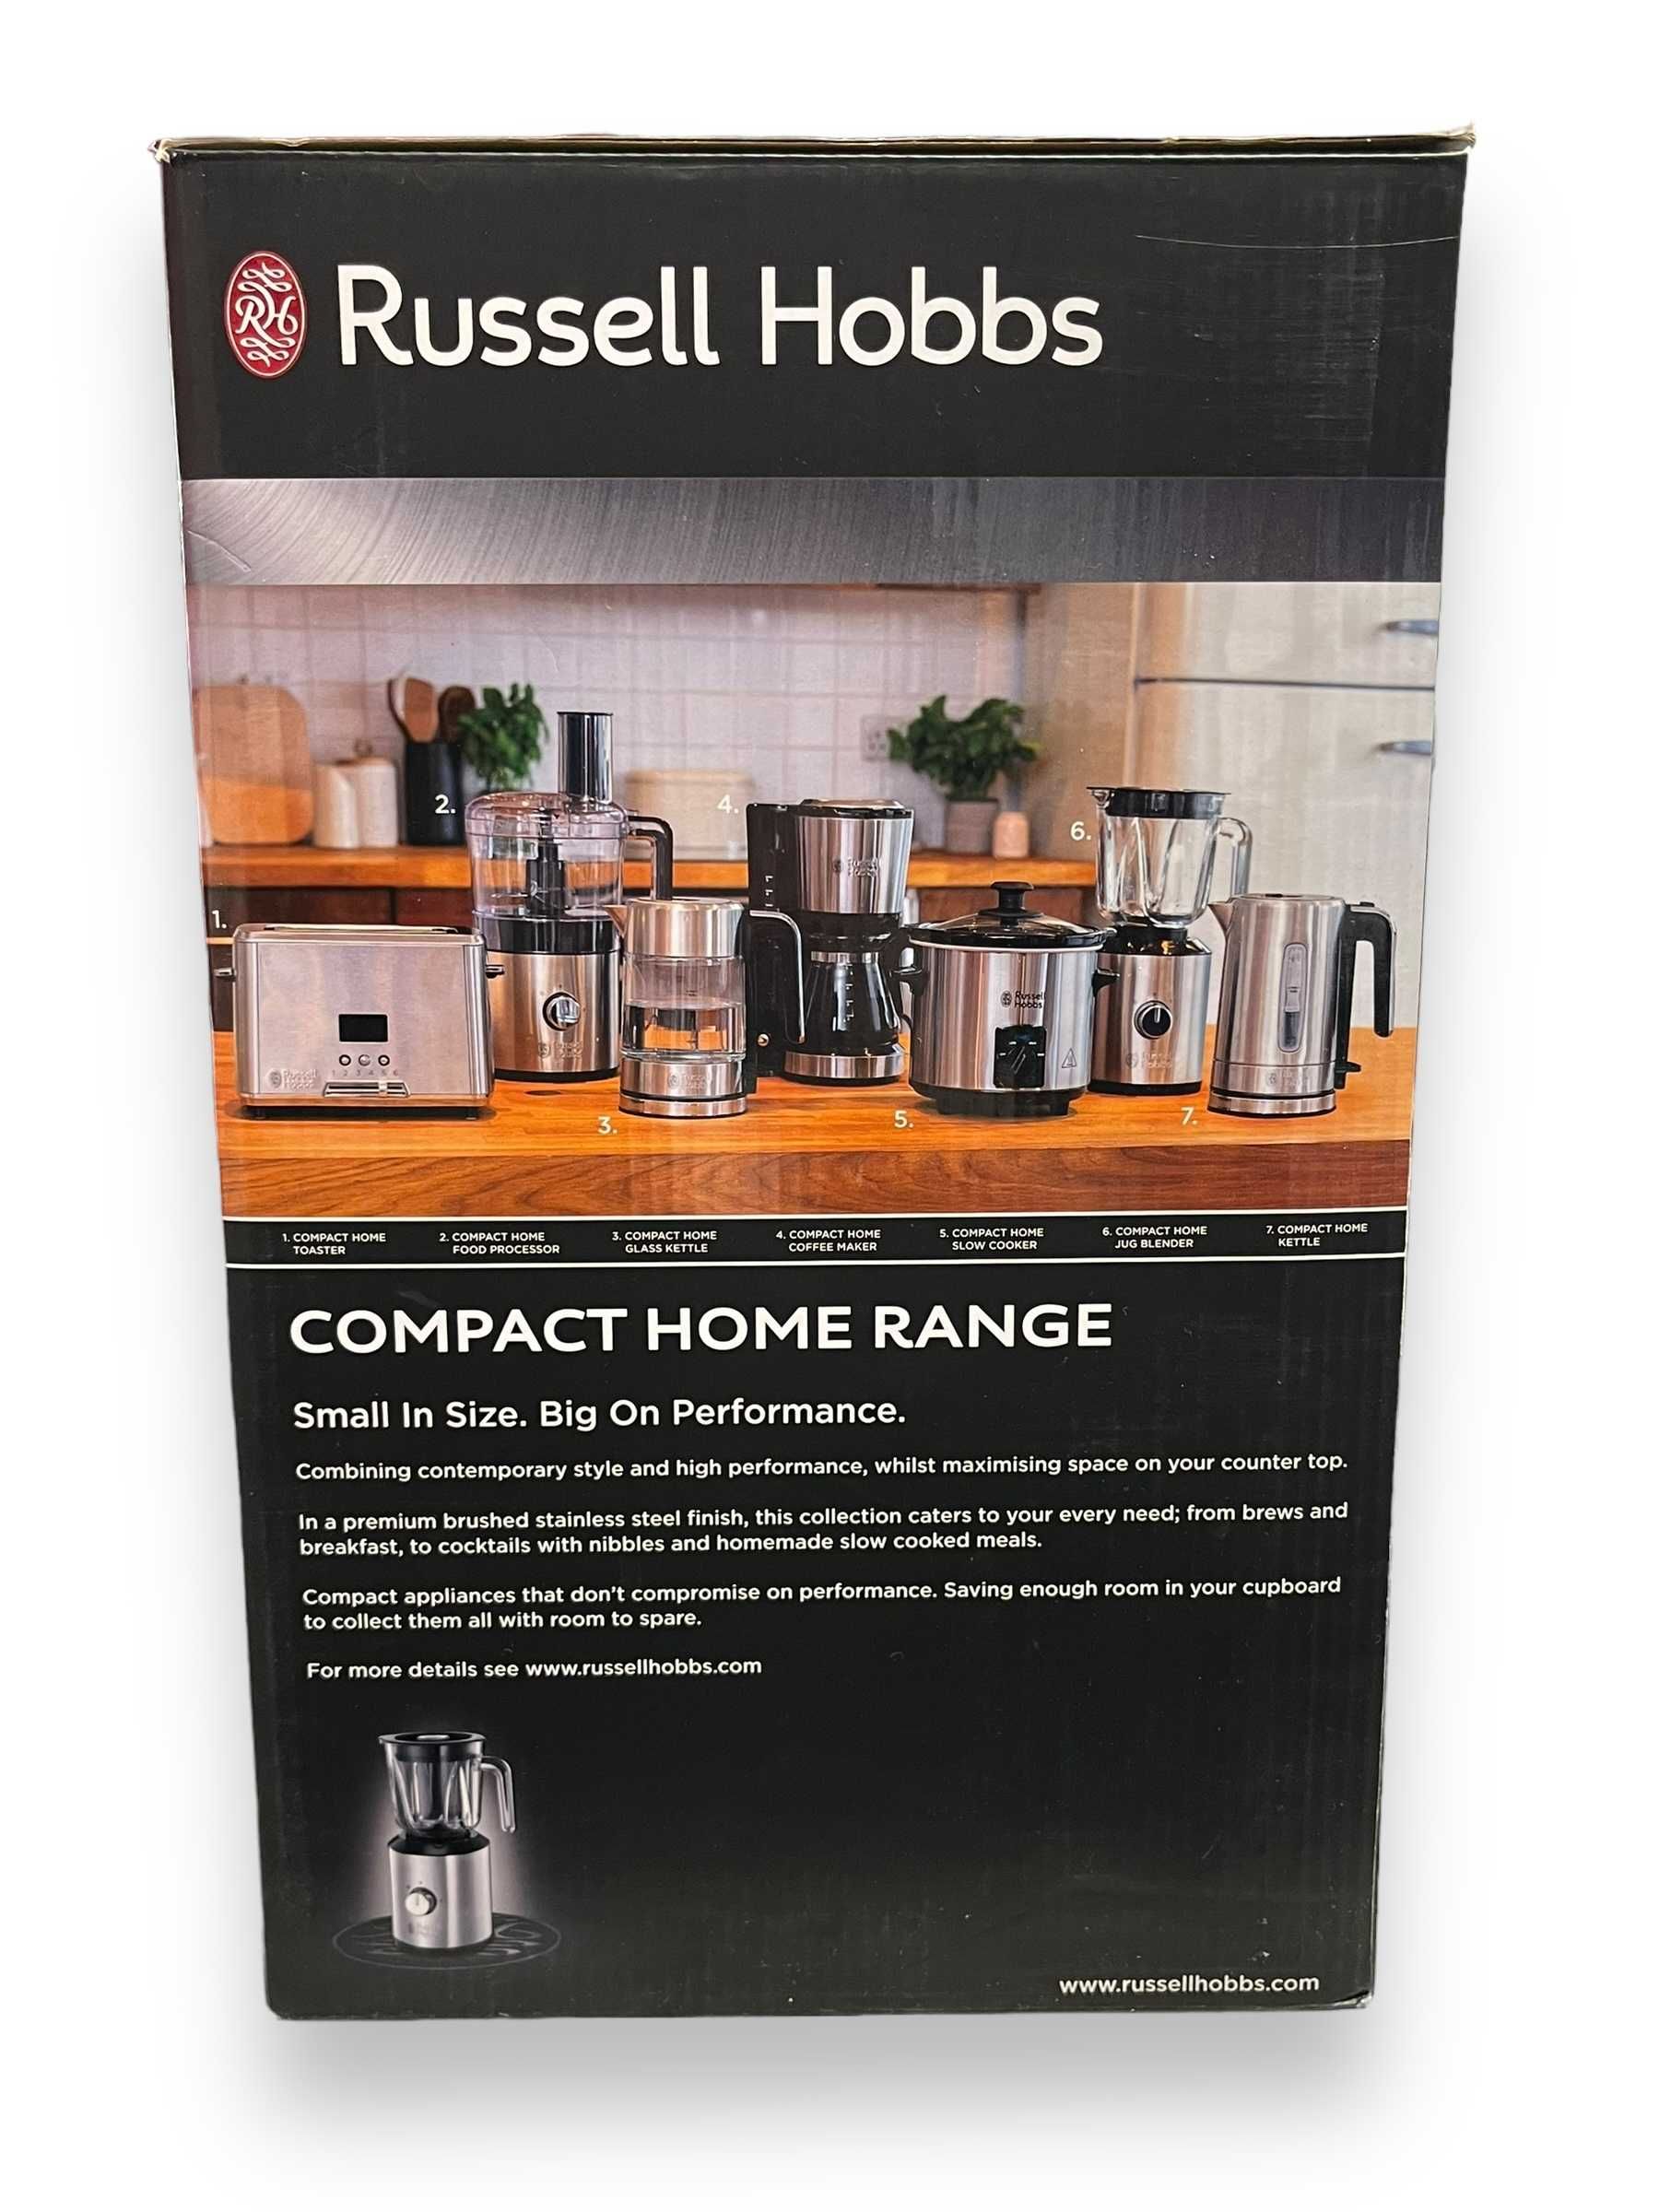 Blender kielichowy RUSSELL HOBBS 25290 Compact Home